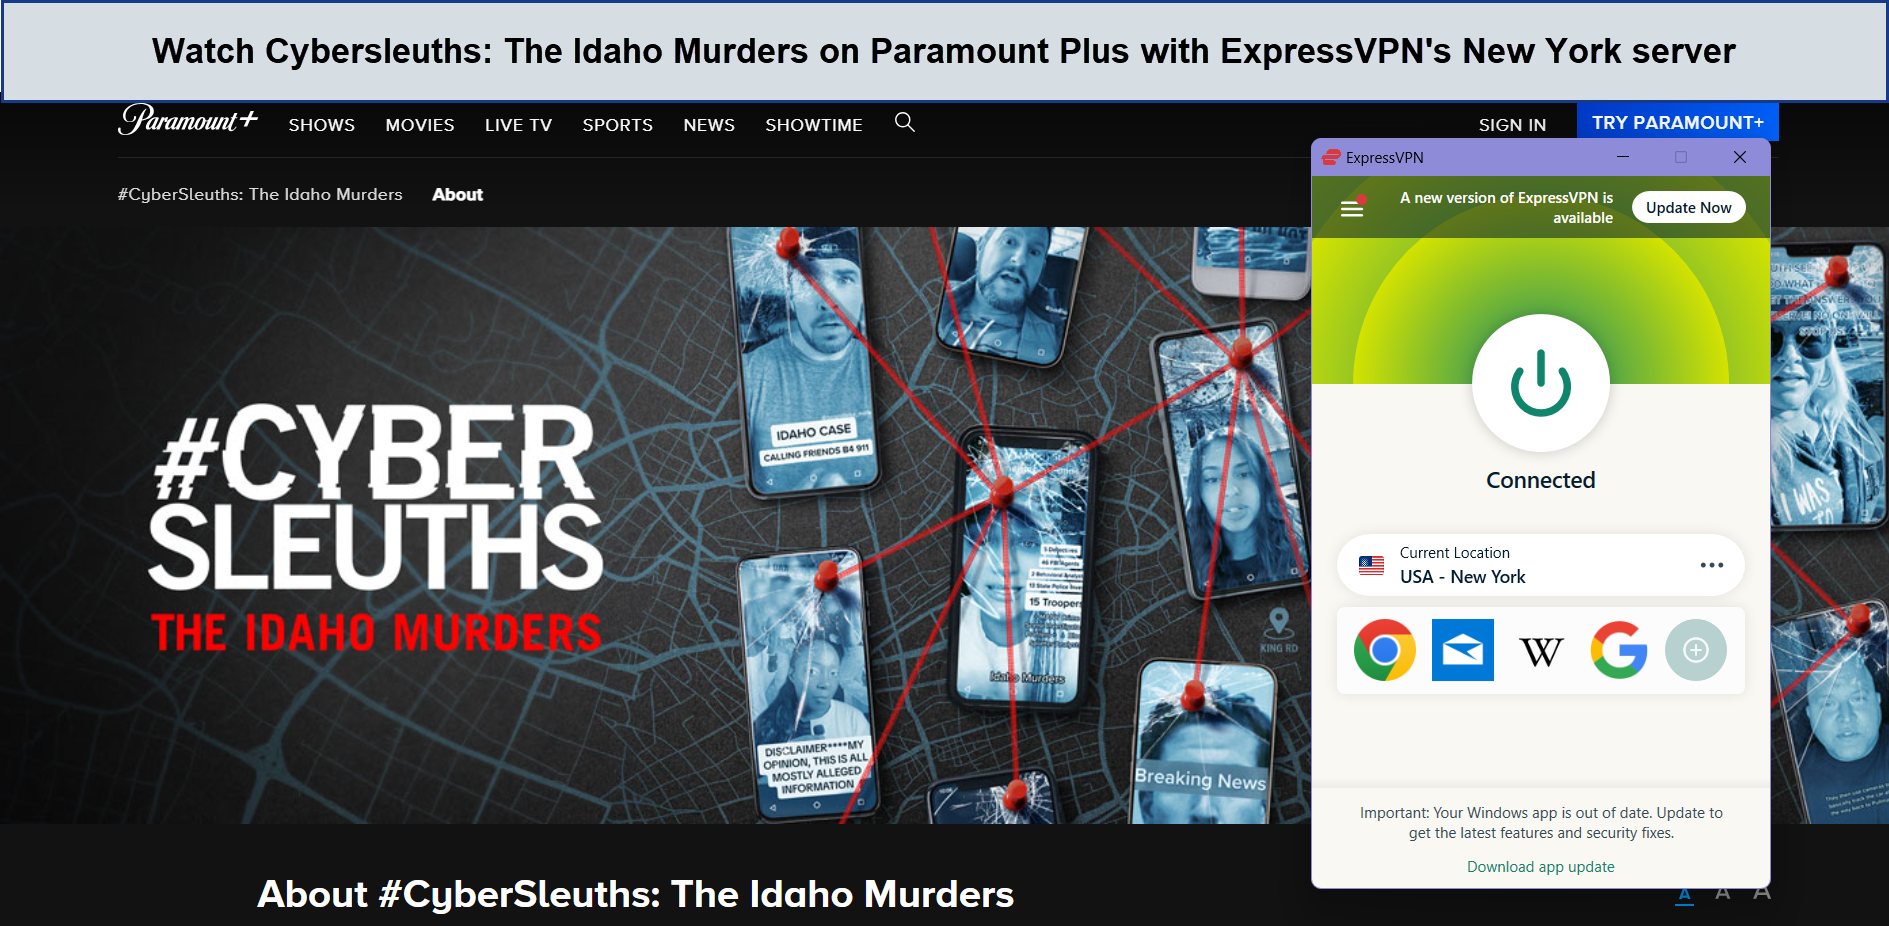 Watch-Cybersleuths-The-Idaho-Murders-on-Paramount-Plus-with-ExpressVPN-in-France